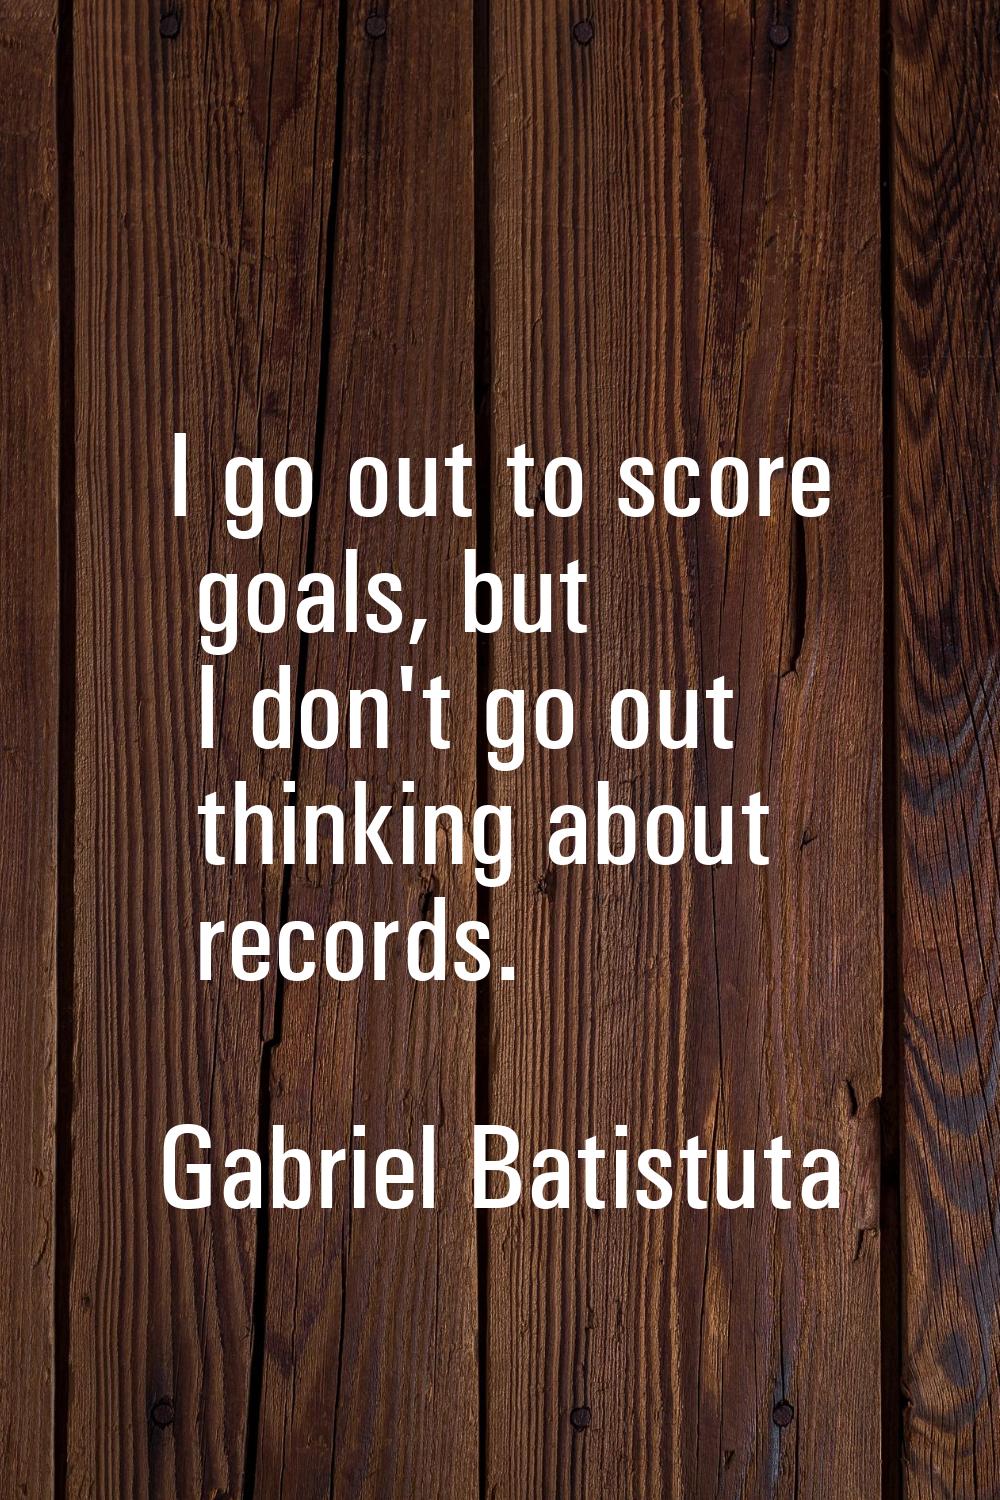 I go out to score goals, but I don't go out thinking about records.